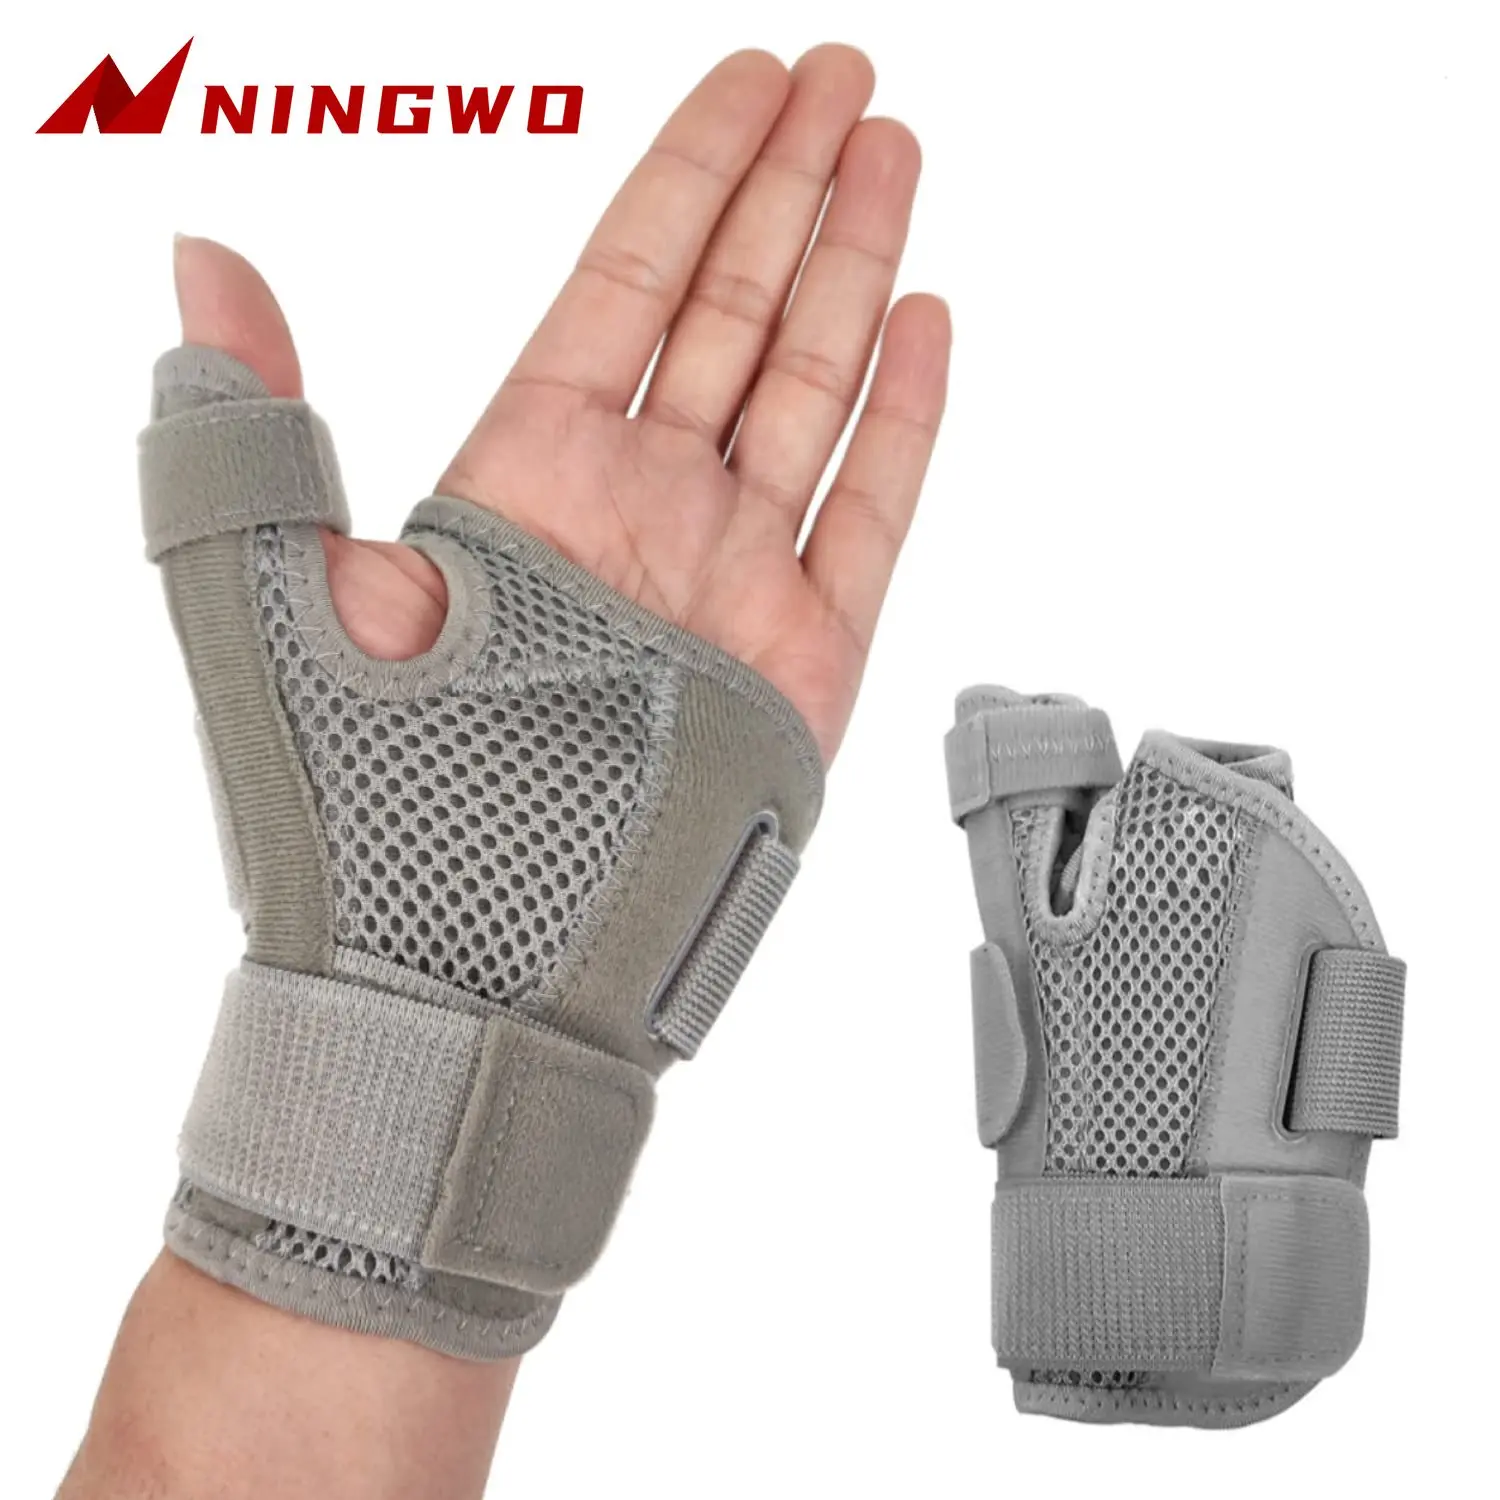 

Wrist Brace for Left or Right Hand - Splint Brace for Carpal Tunnel,Tendonitis,& Arthritis in Hands or Fingers.Thumb Support